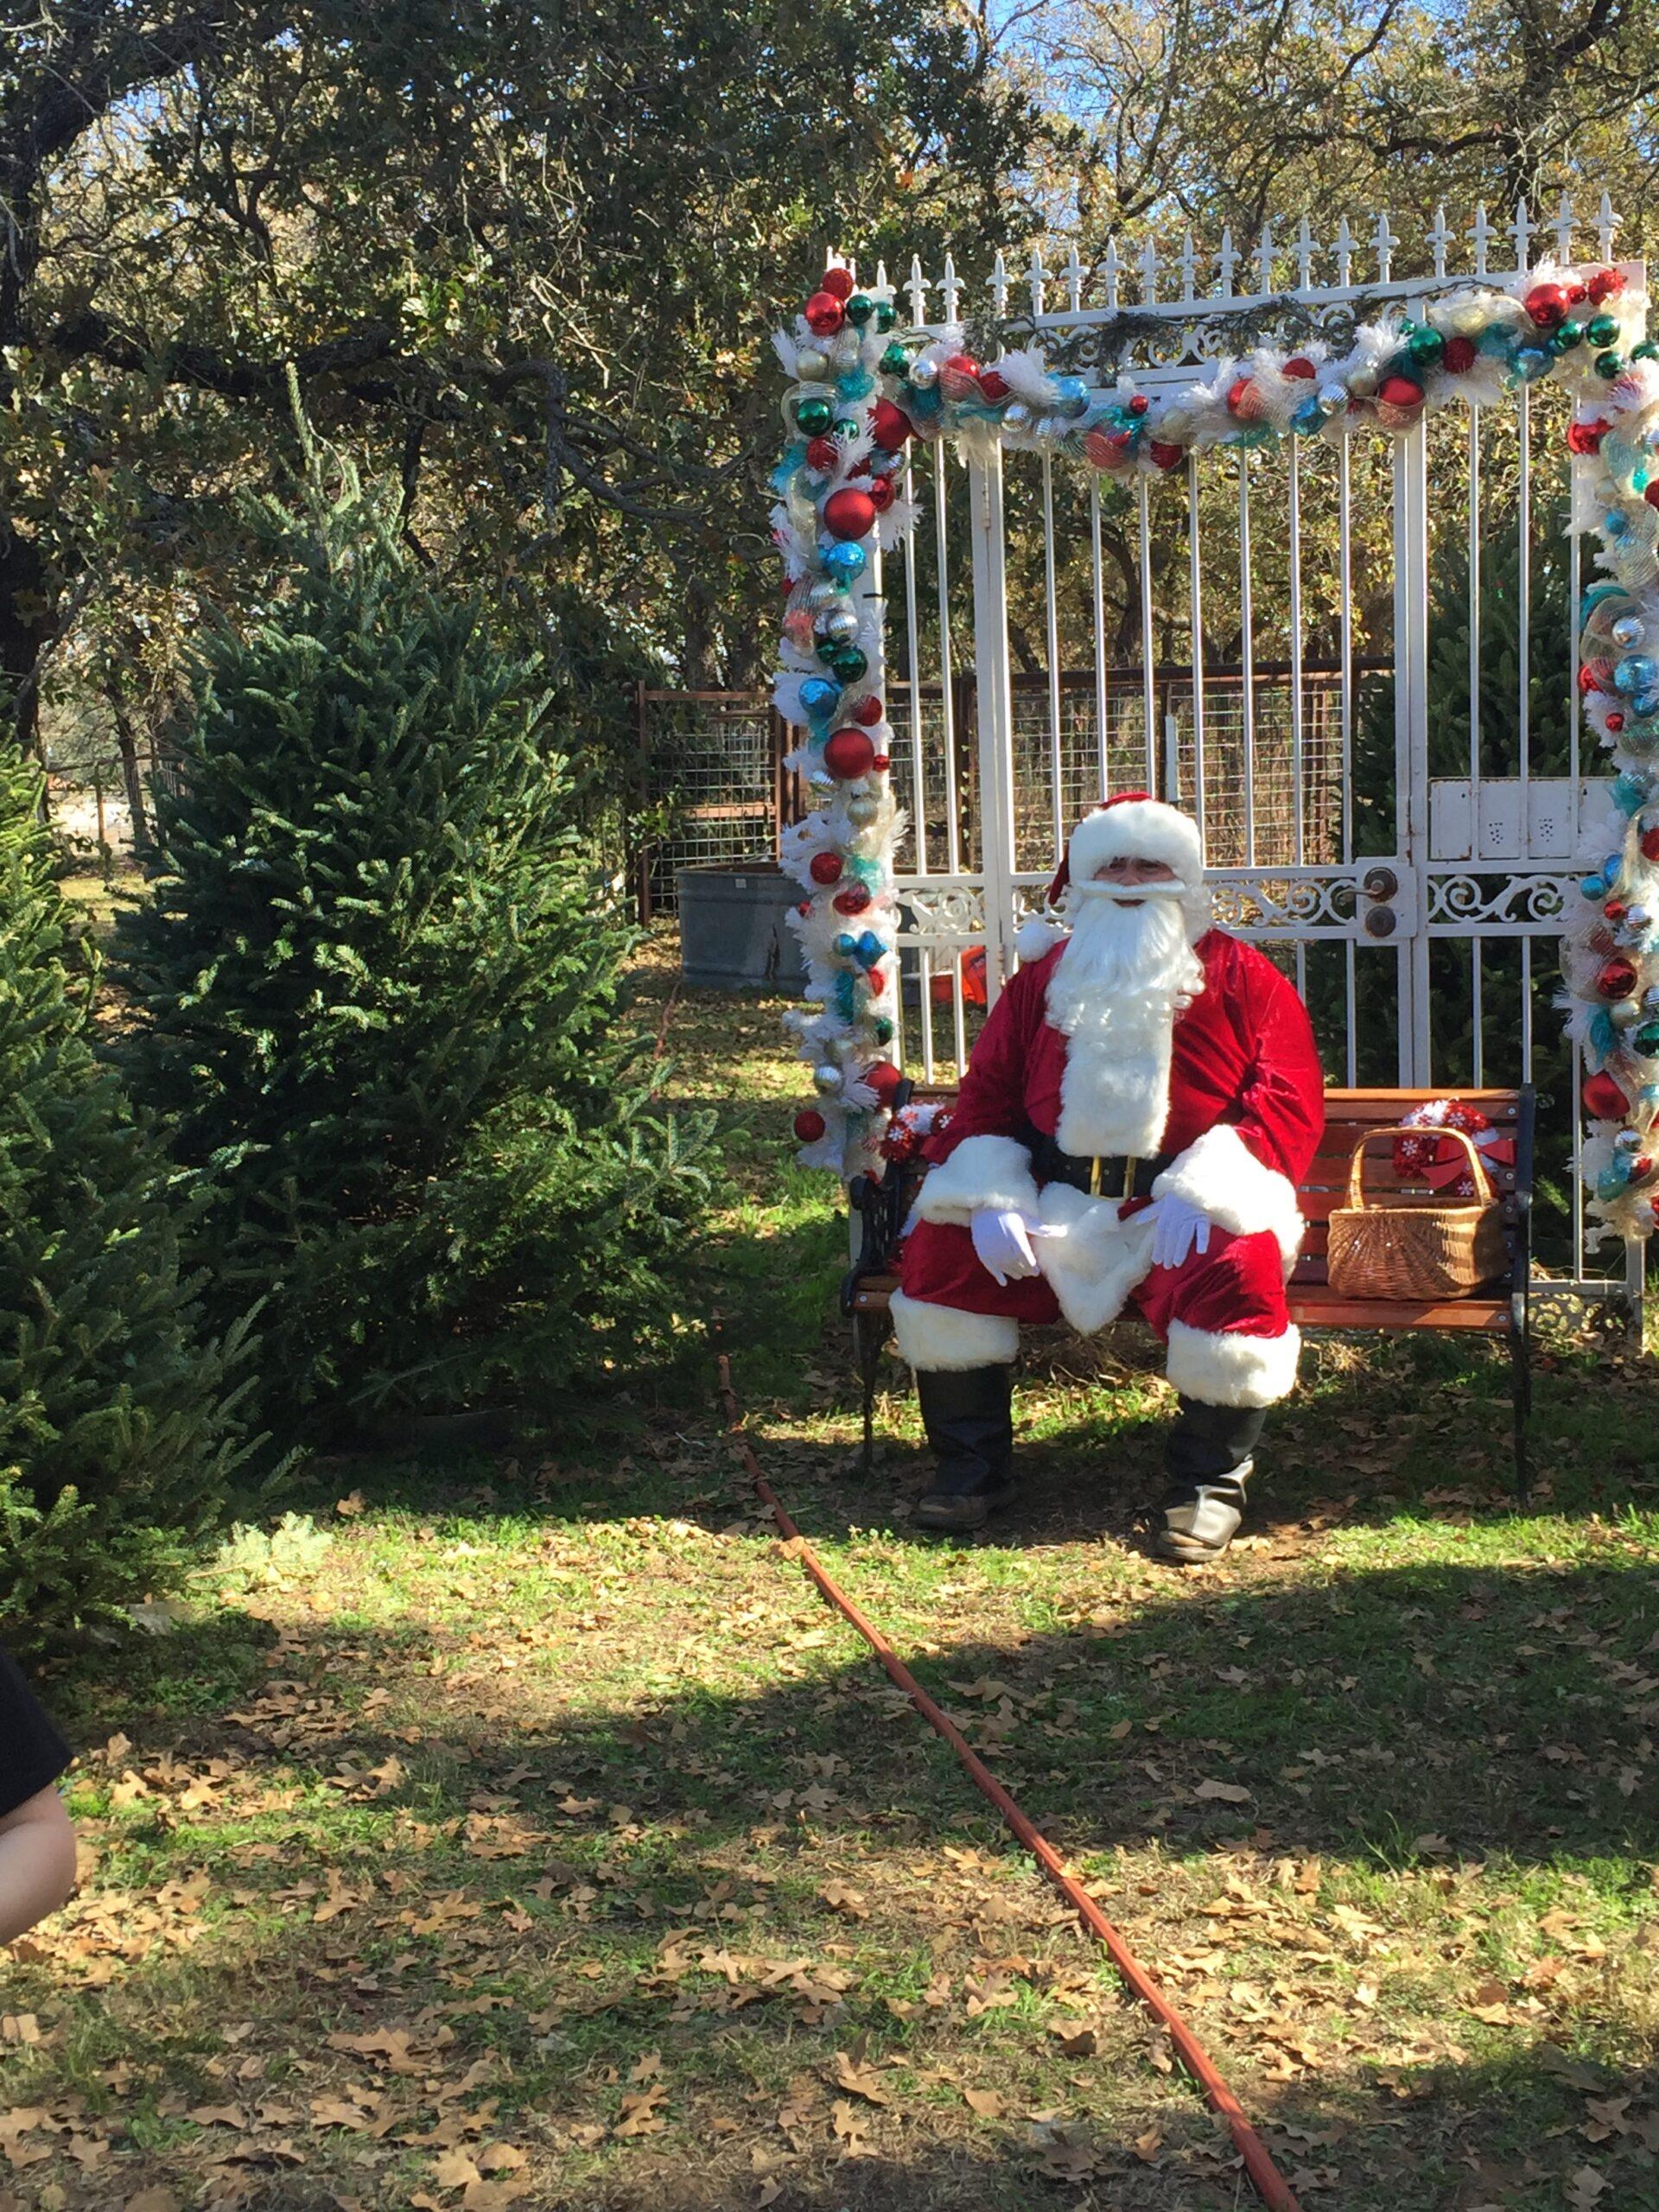 Santa sitting in front of a gate decorated at Haynie's Green Acres Christmas Tree Farm